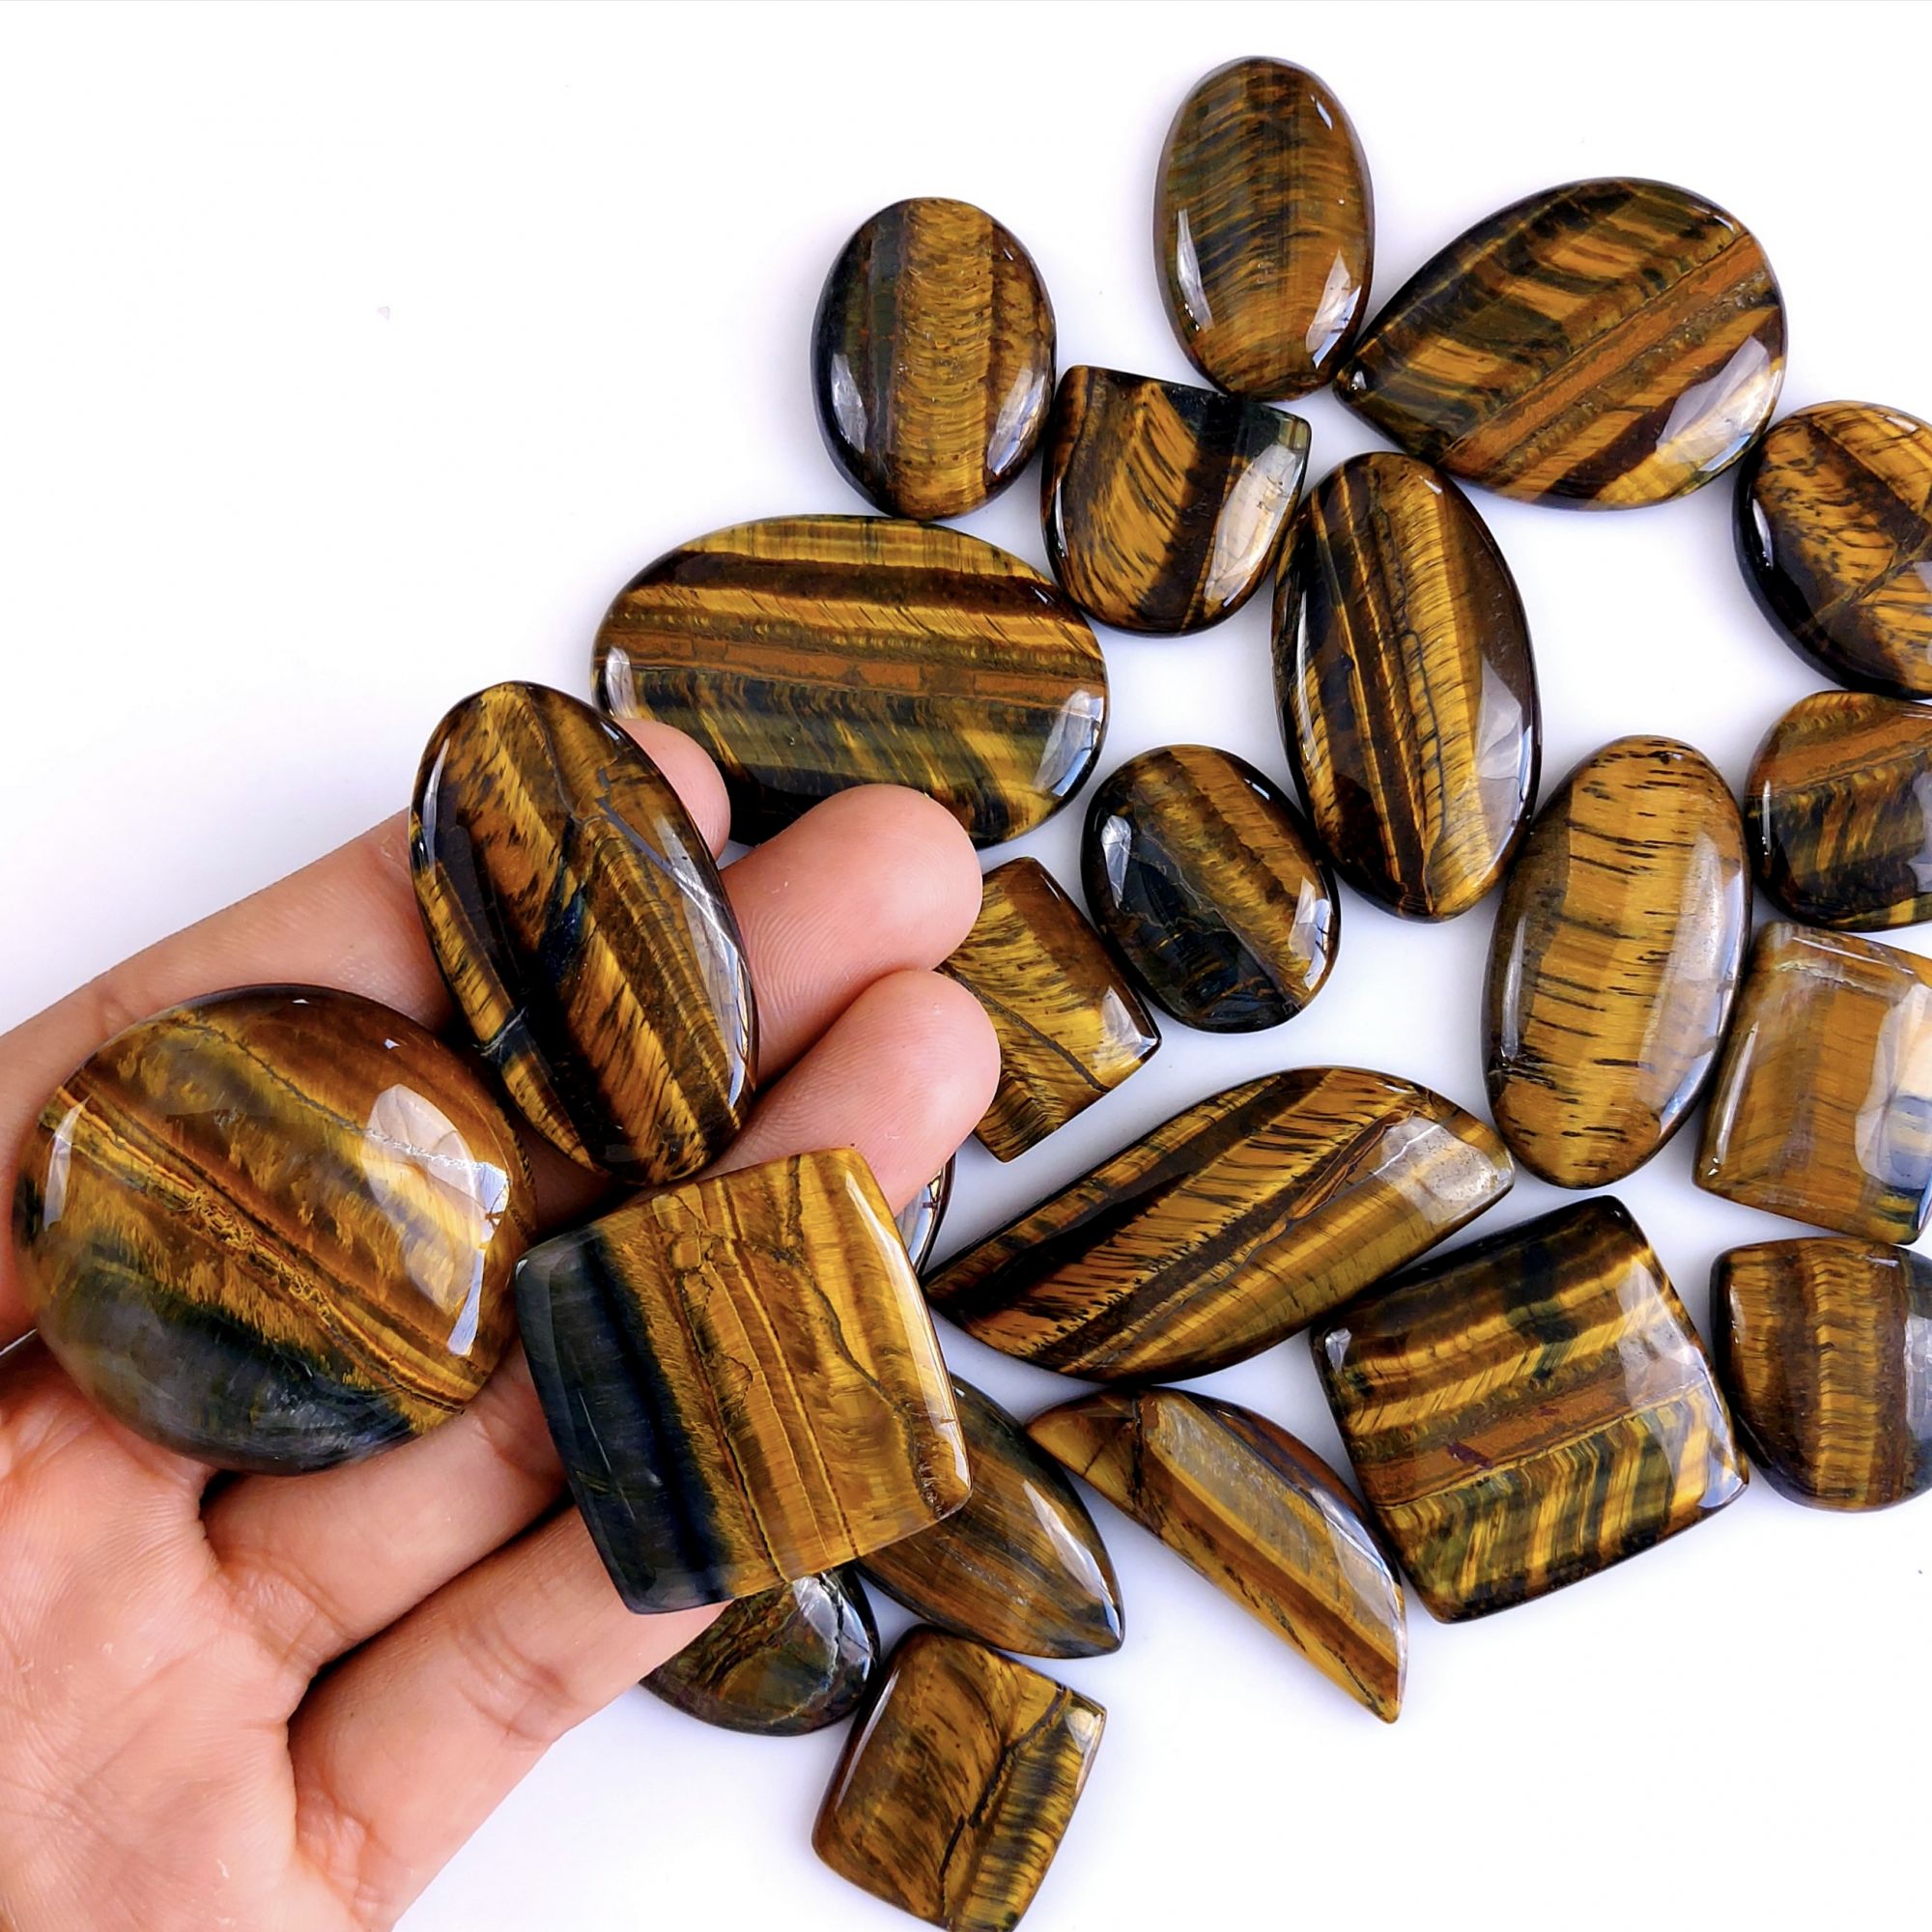 23Pcs 1016Cts Natural Tiger Eye Loose Cabochon Gemstone Lot Mix Shape and and Size for Jewelry Making 38x38 20x18mm#1302